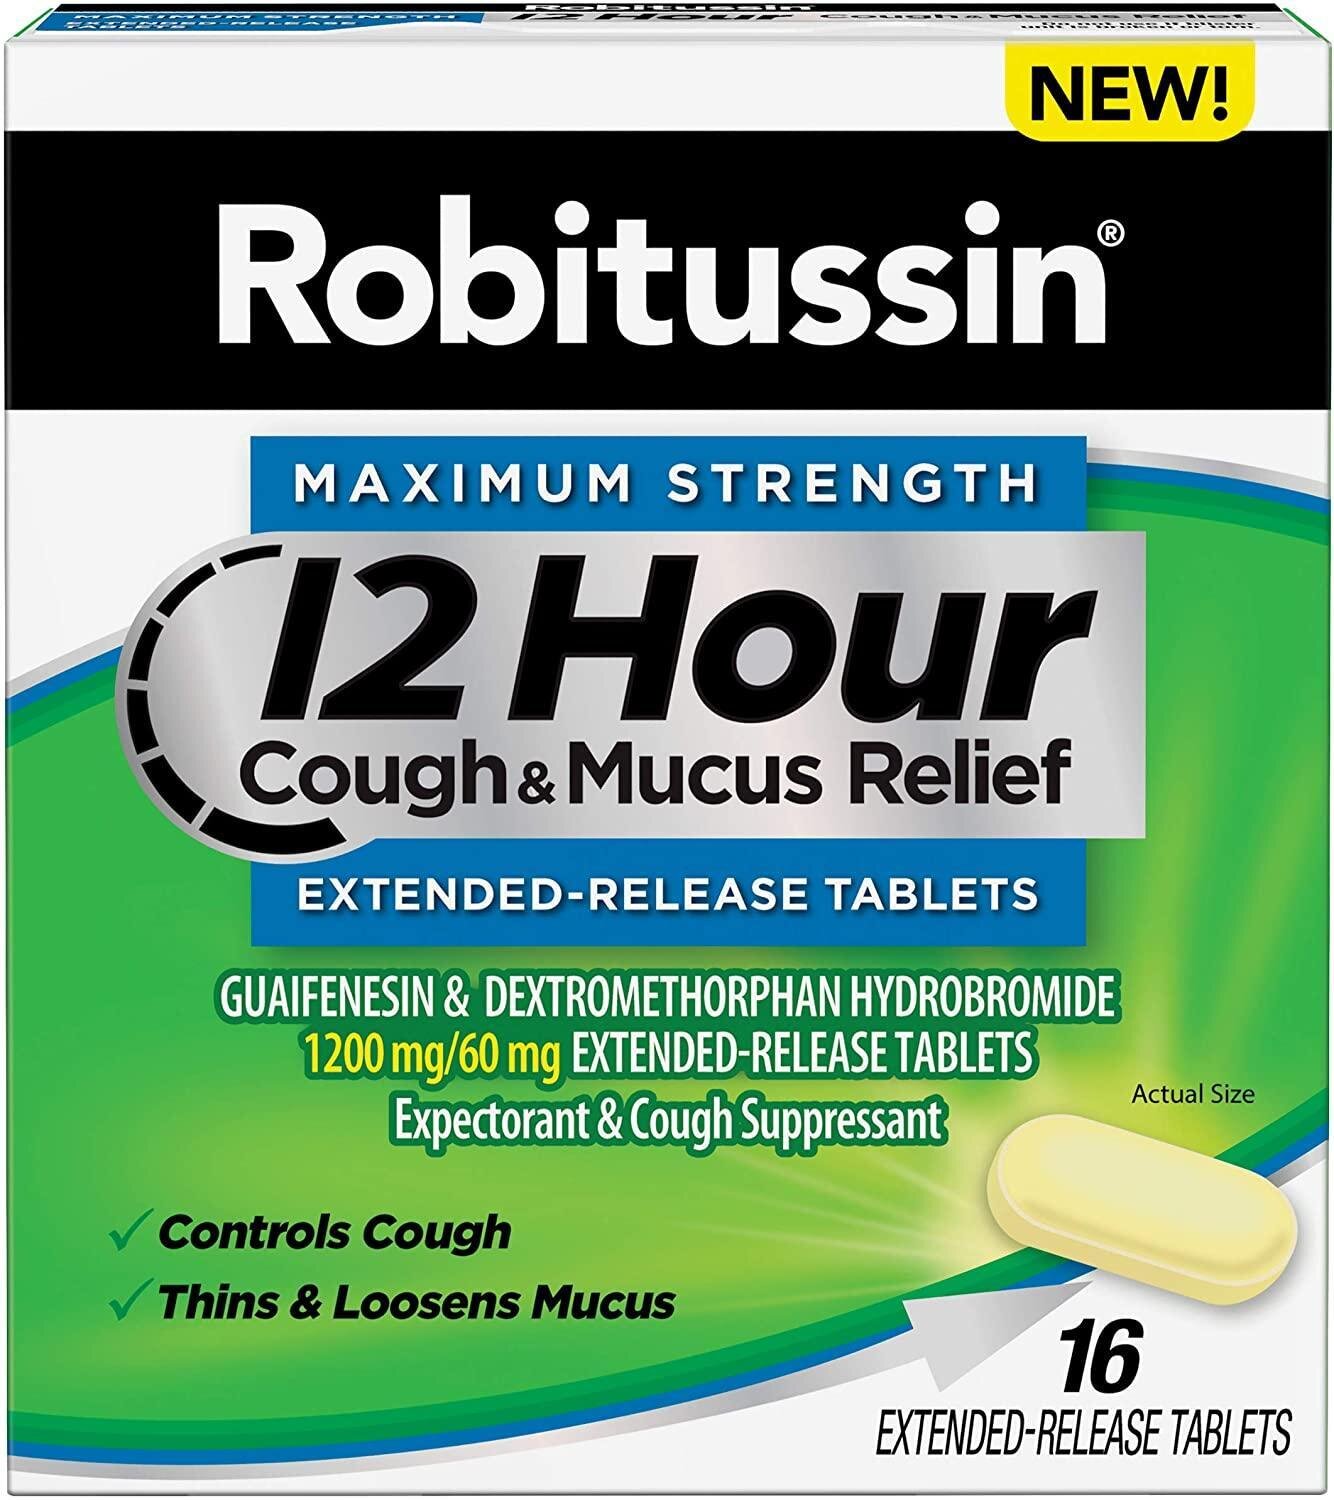 Robitussin Maximum Strength 12 Hour Cough and Mucus Relief Extended-Release  Tablets 16 ct